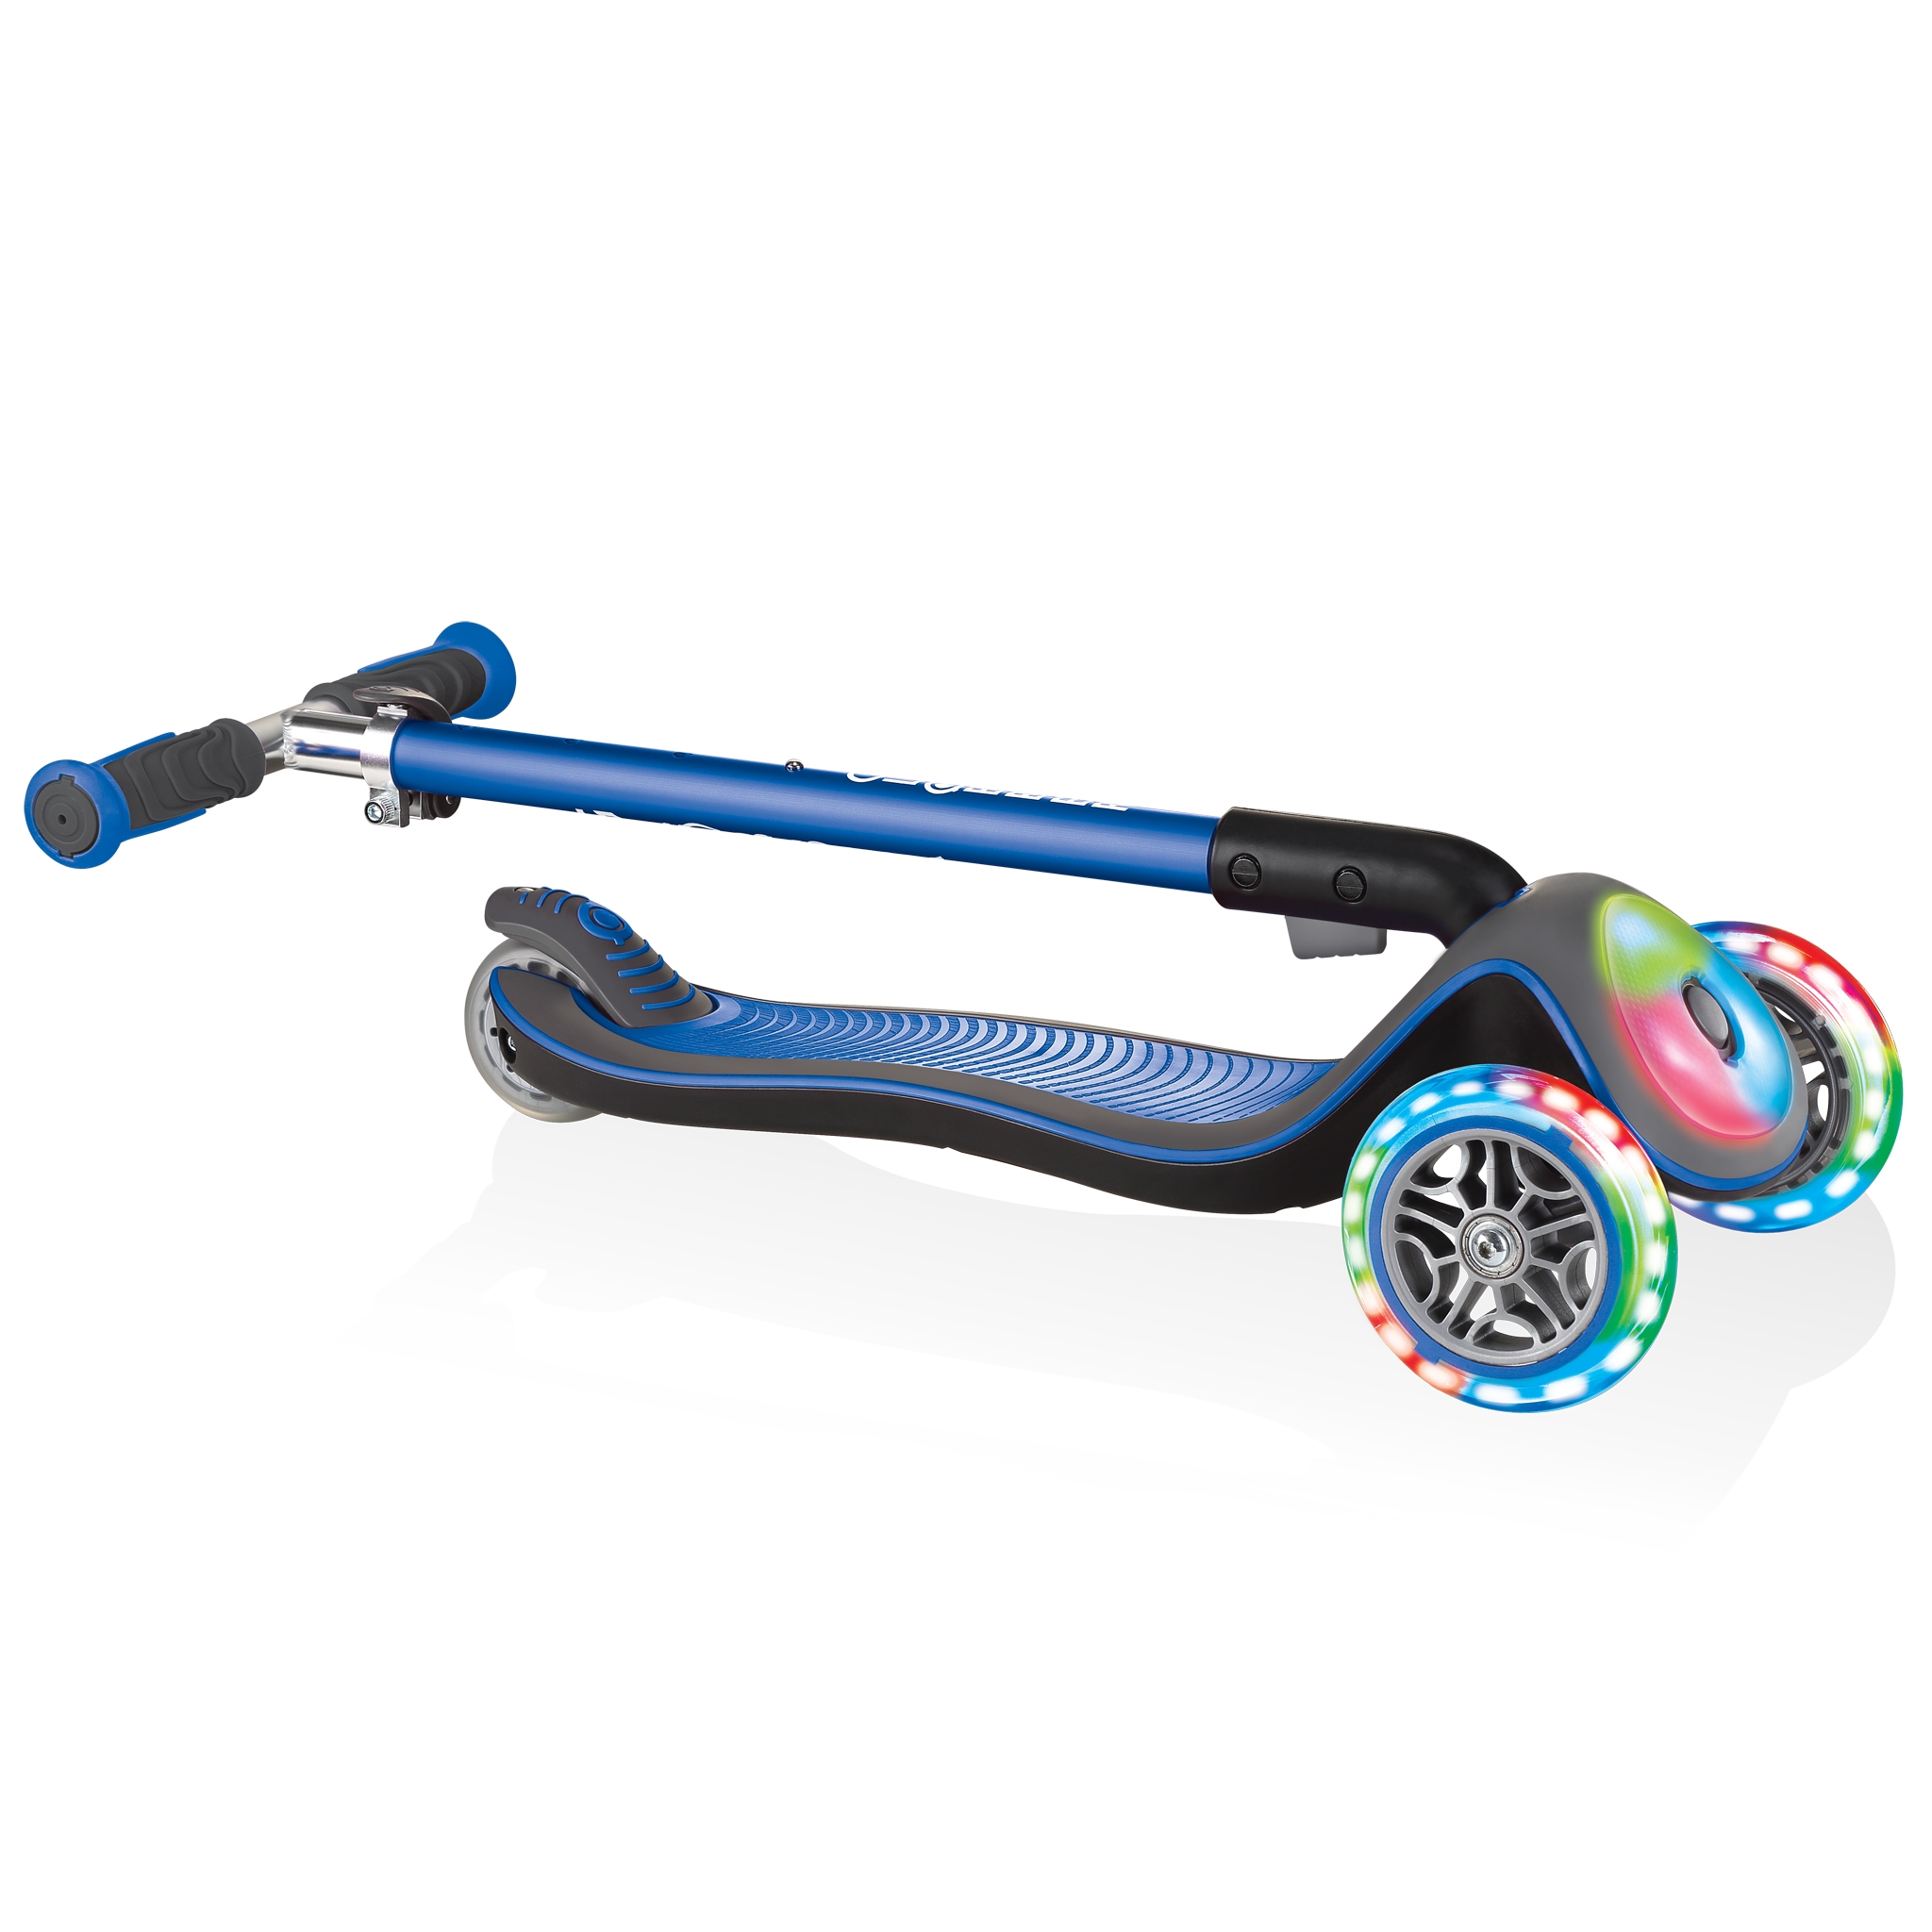 Globber-ELITE-DELUXE-FLASH-LIGHTS-3-wheel-foldable-scooter-for-kids-with-light-up-deck-module-and-wheels-navy-blue 4